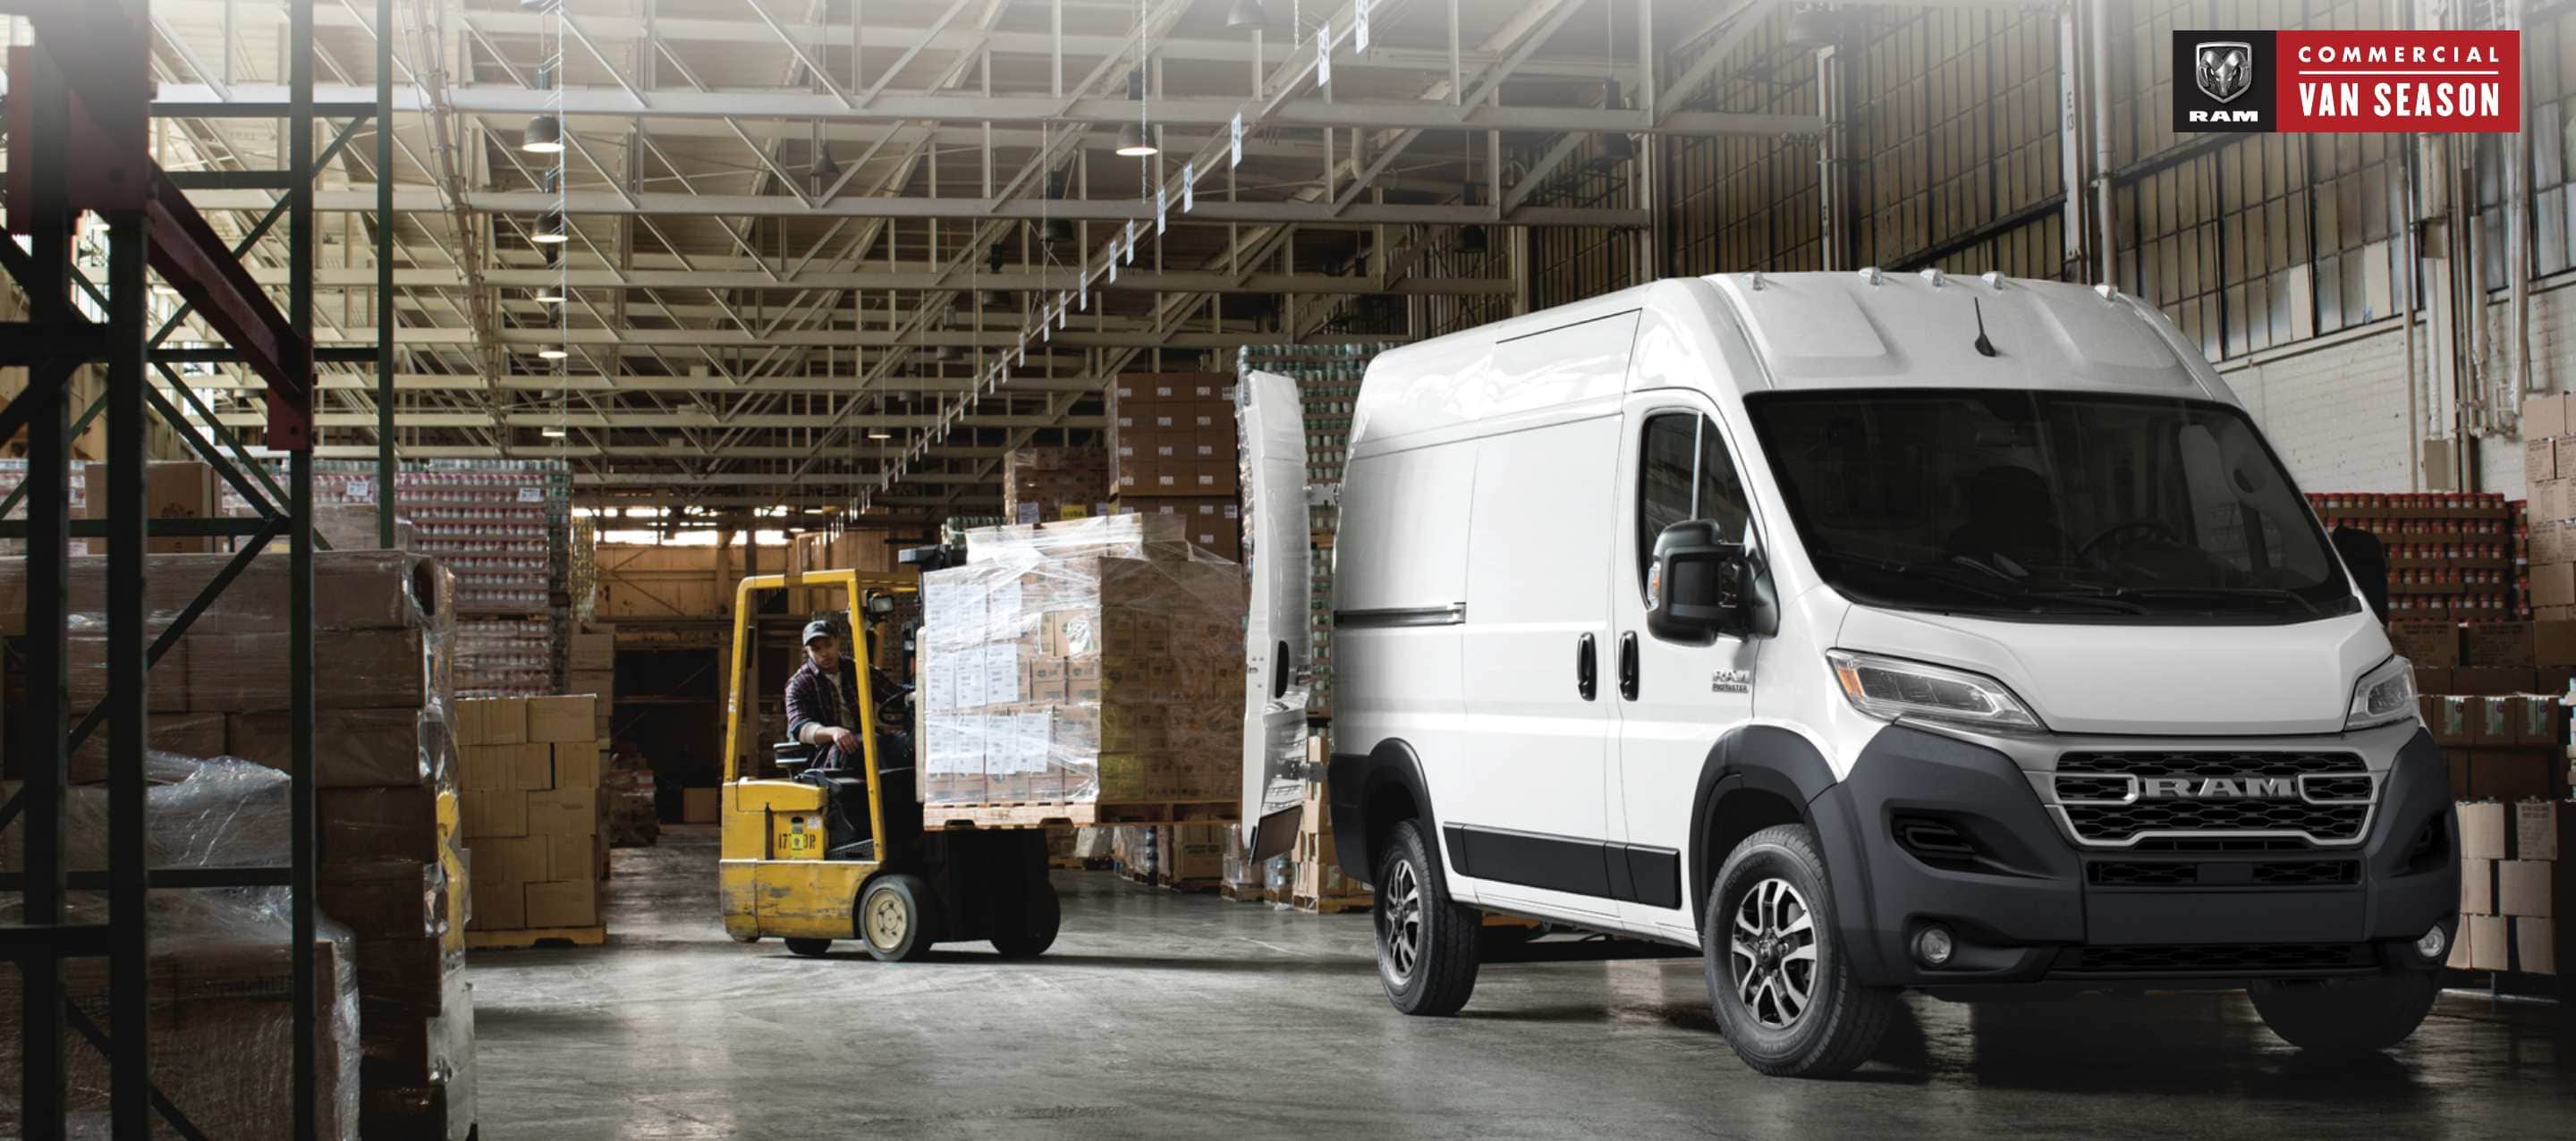 An angled front profile of a white 2023 Ram ProMaster 1500 High Roof Cargo Van, with its rear doors fully open and a forklift with a pile of boxes being driven toward the back of the van. Ram Commercial Van Season.